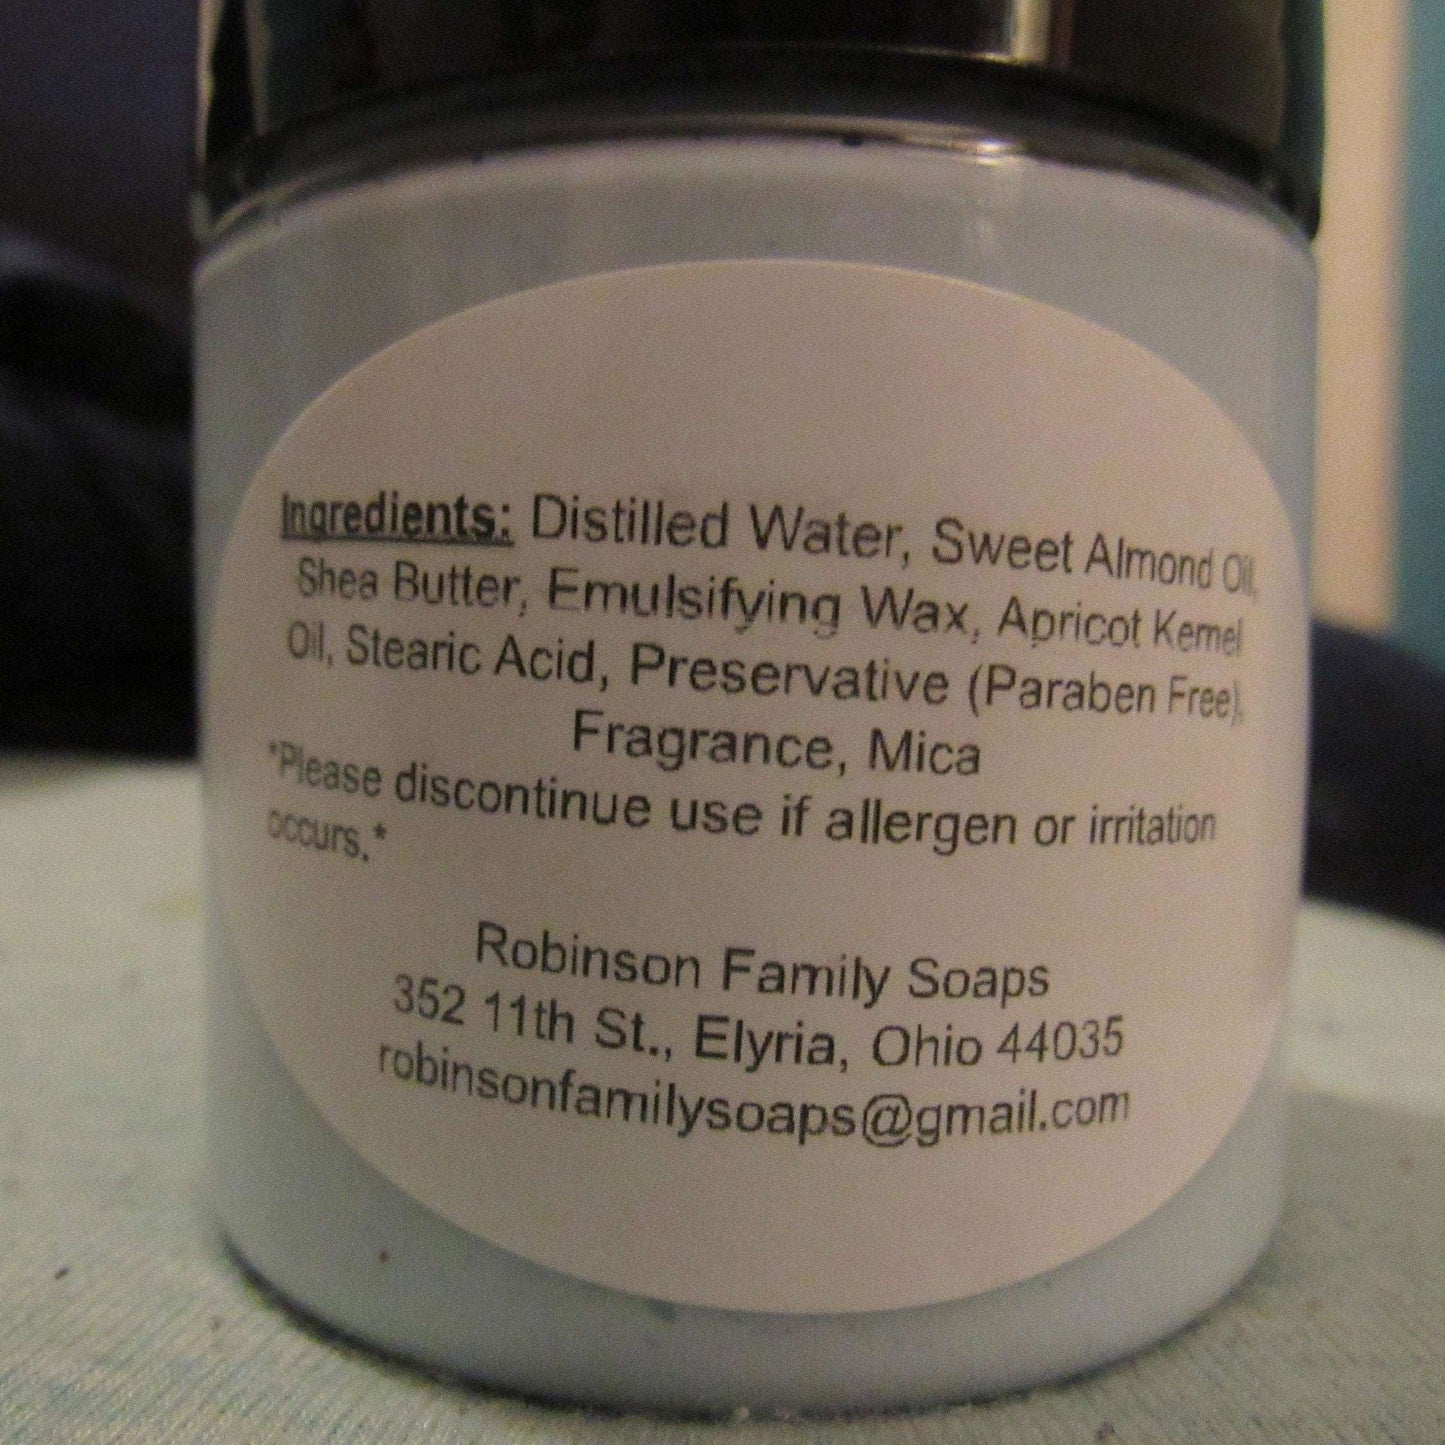 Jayden's Wish Lotion for Sensitive Skin & Skin Aliments Scented & Fragrance Free Lotion & Moisturizer Robinson Family Soaps   